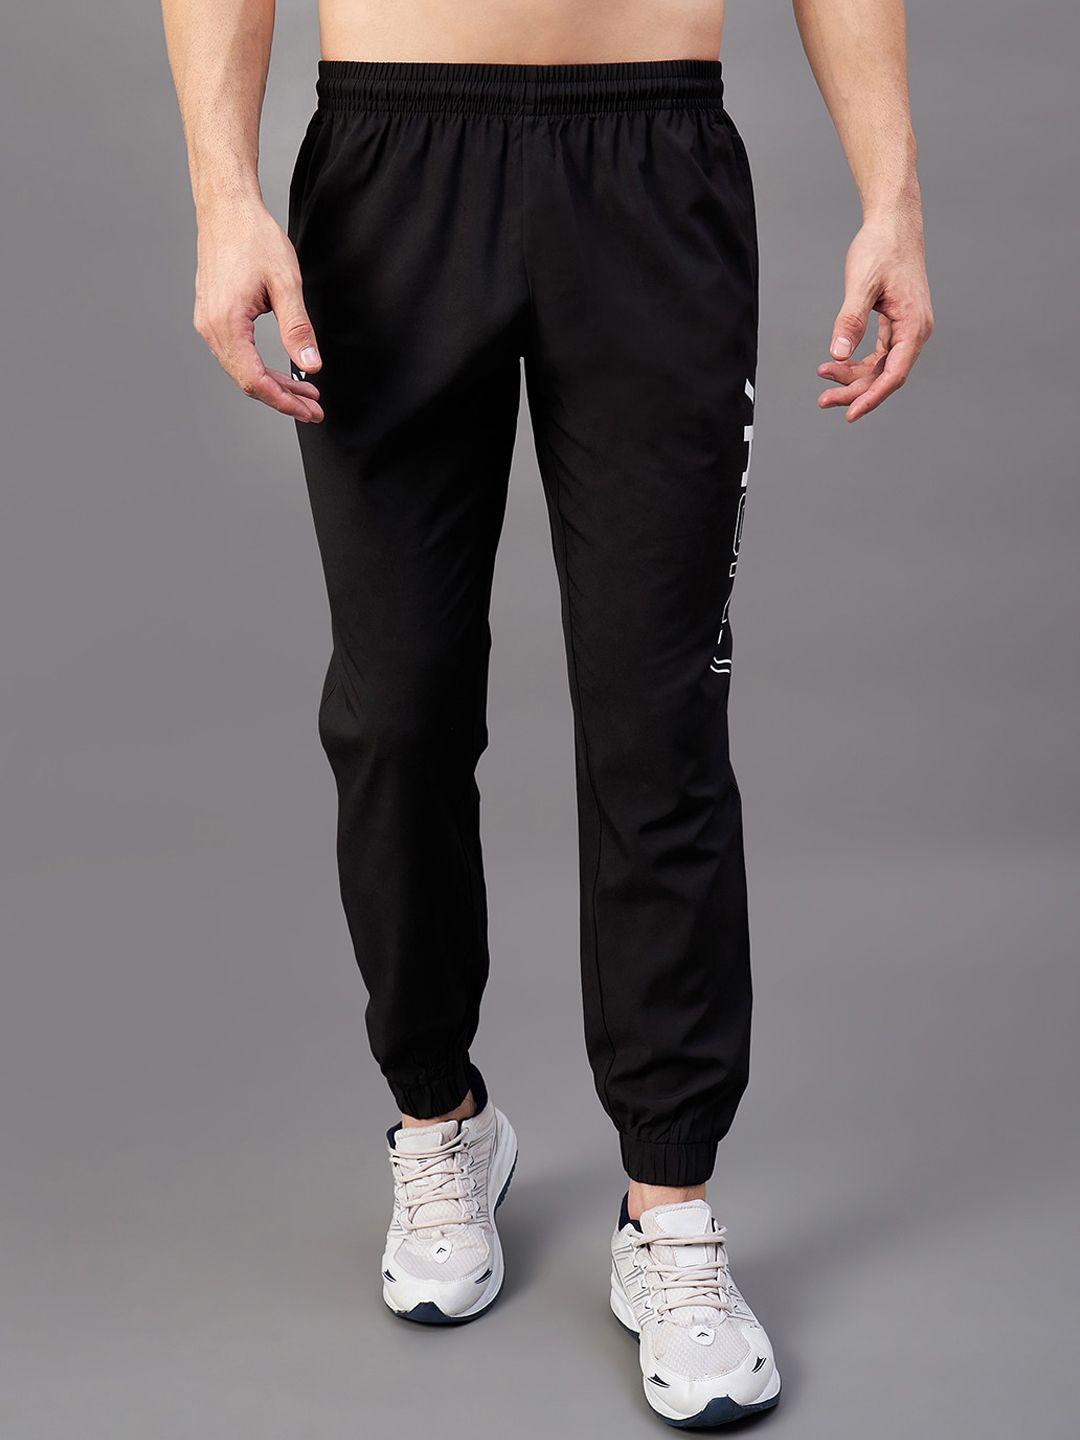 masch-sports-men-mid-rise-typography-printed-rapid-dry-sports-joggers